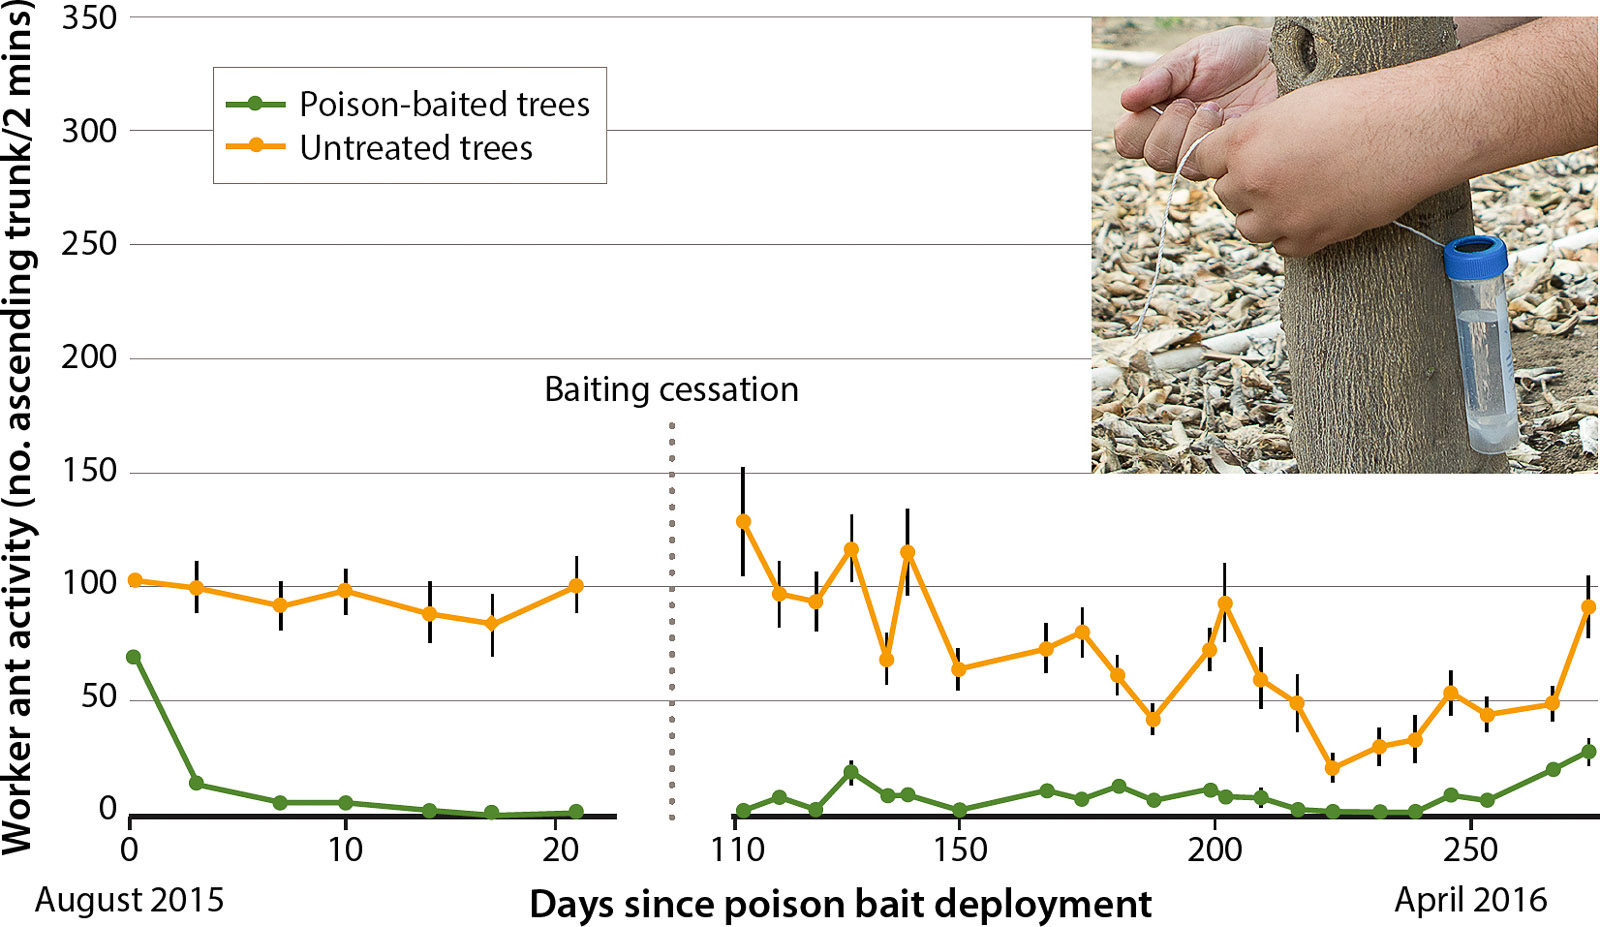 Visual two-minute assessments of Argentine ant activity on 33 liquid poison-baited (0.0001% thiamethoxam in a 25% sucrose solution) and untreated navel orange trees in an unsprayed citrus grove over a 9-month period. Activity on baited trees decreased by ∼ 75% within a few days of treatment and remained near 0 for the entire baiting period. Following bait removal in November, activity on previously baited trees was low and did not show signs of recovery until late April.